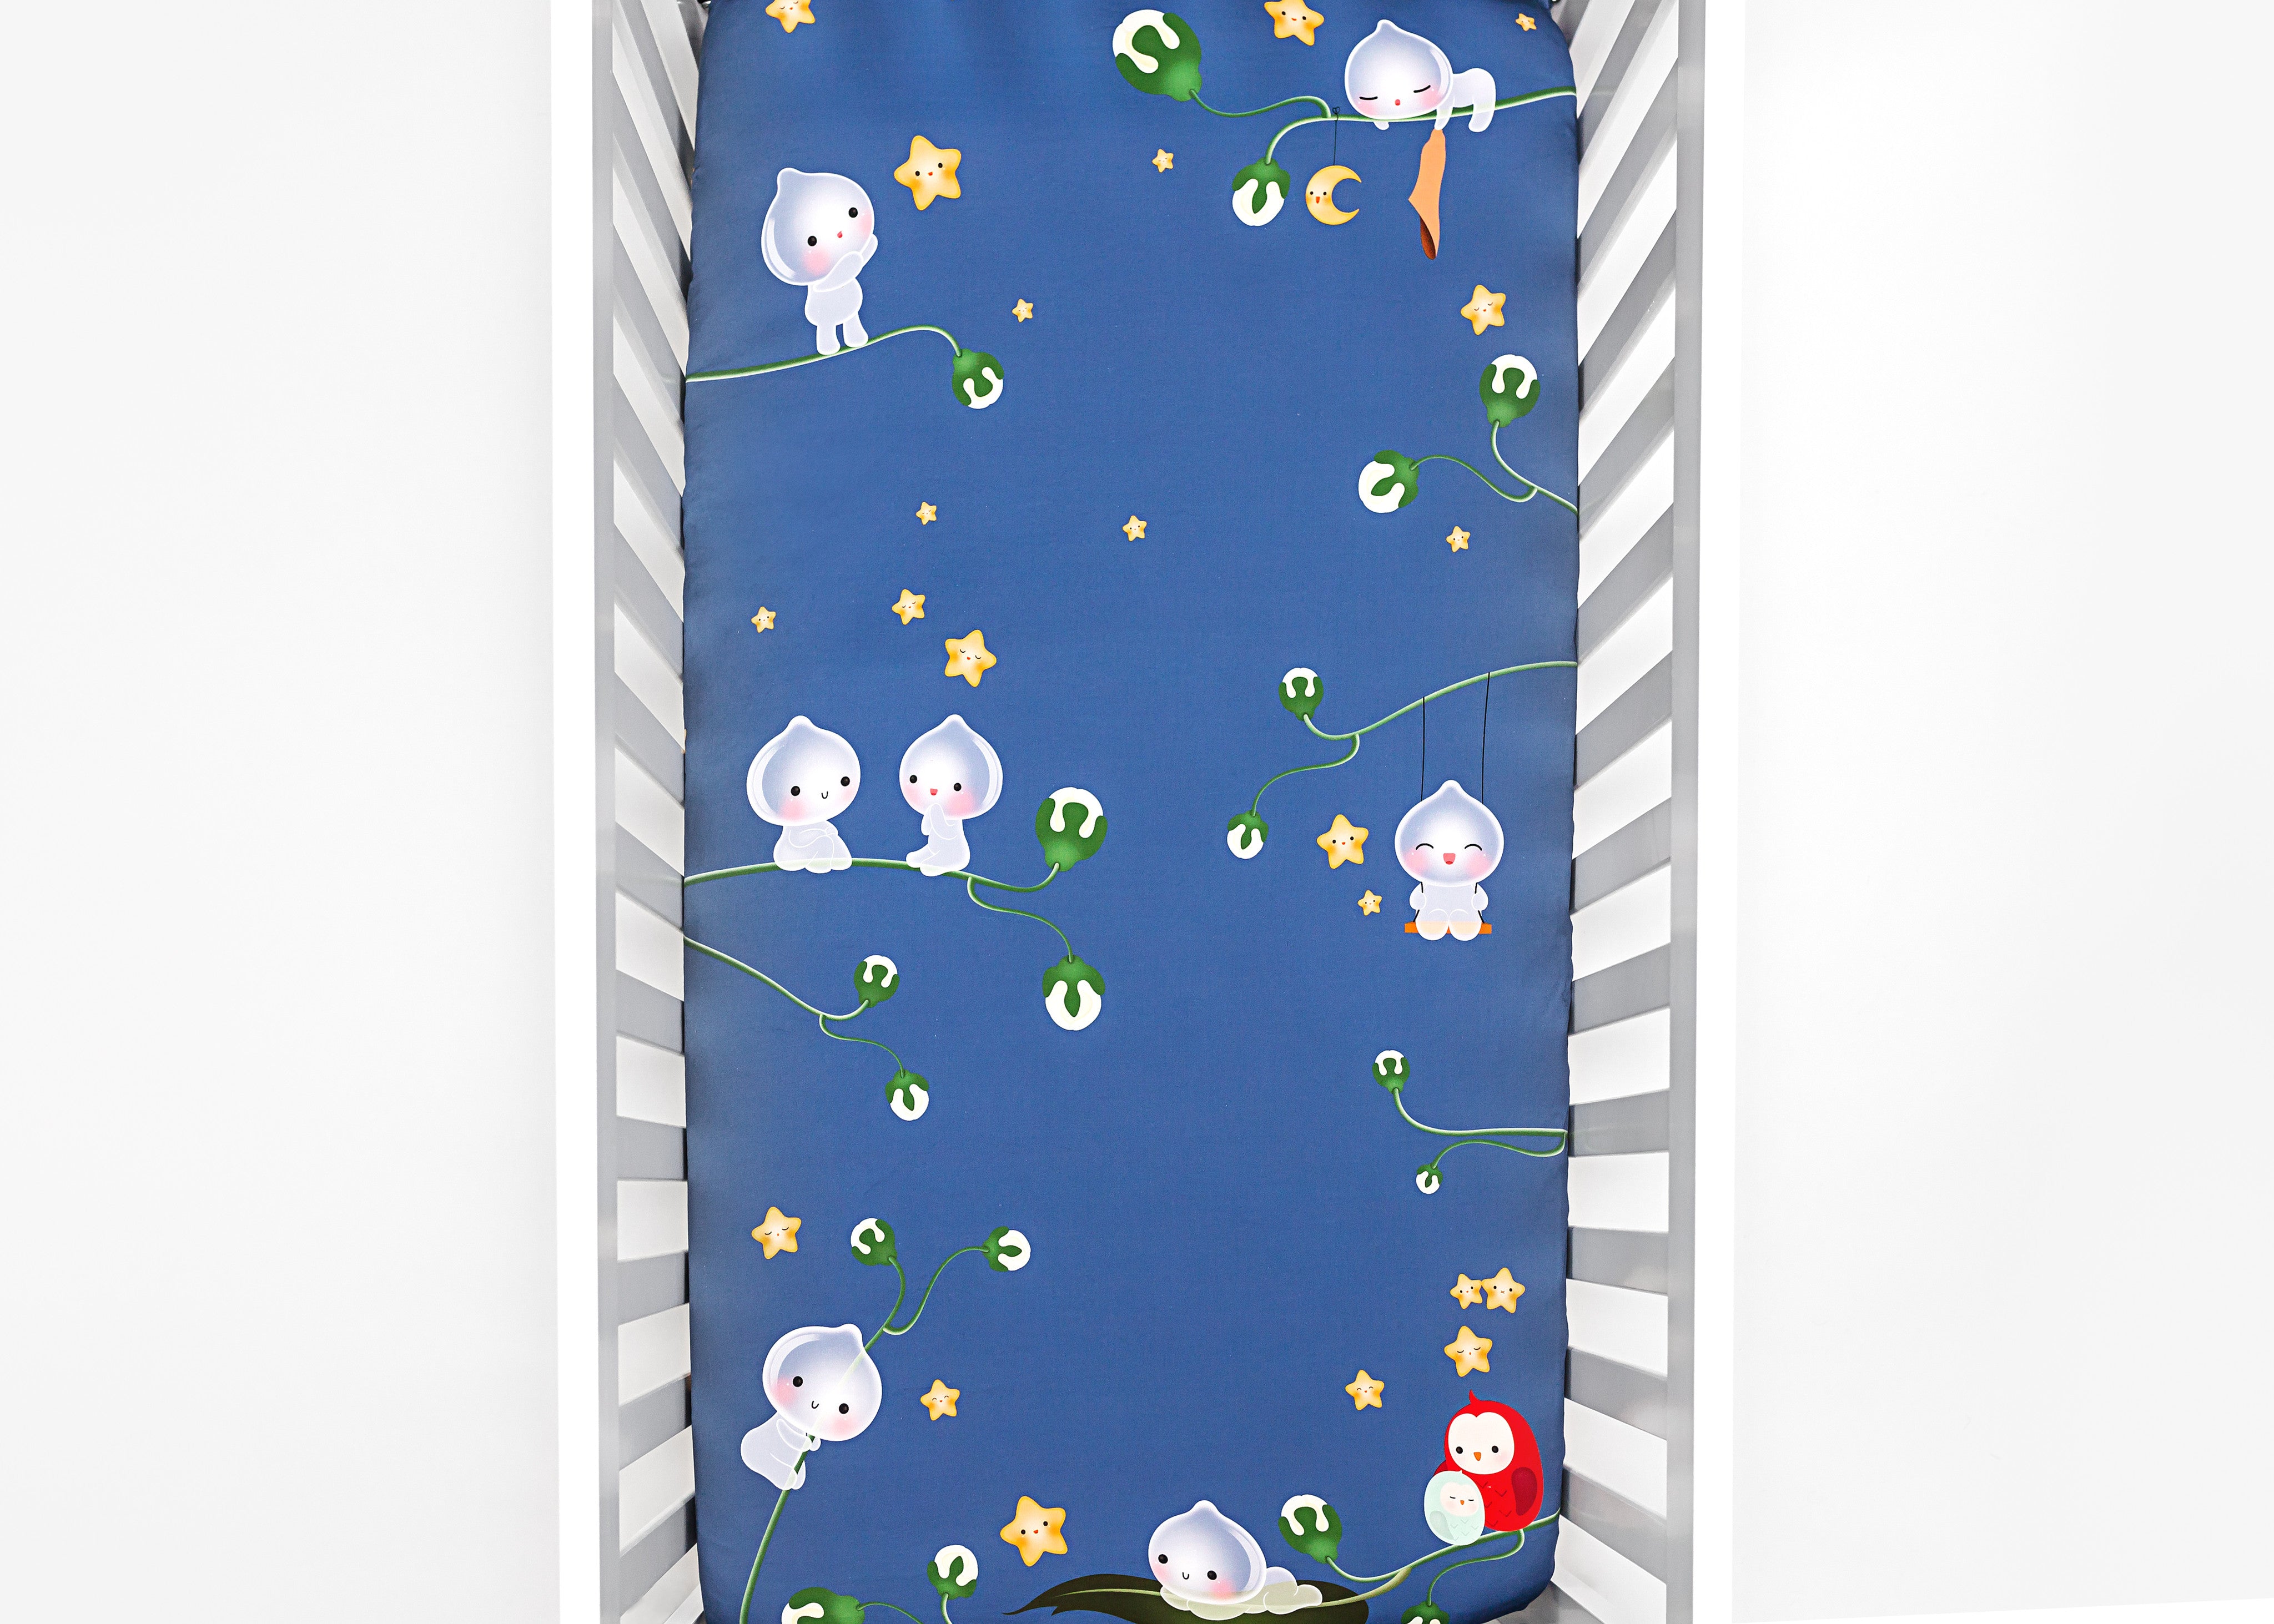 Fitted baby crib sheet by Rookie Humans, Magic Forest. Illustrated by Silvia Portella. Designed for the modern nursery, navy crib sheet.